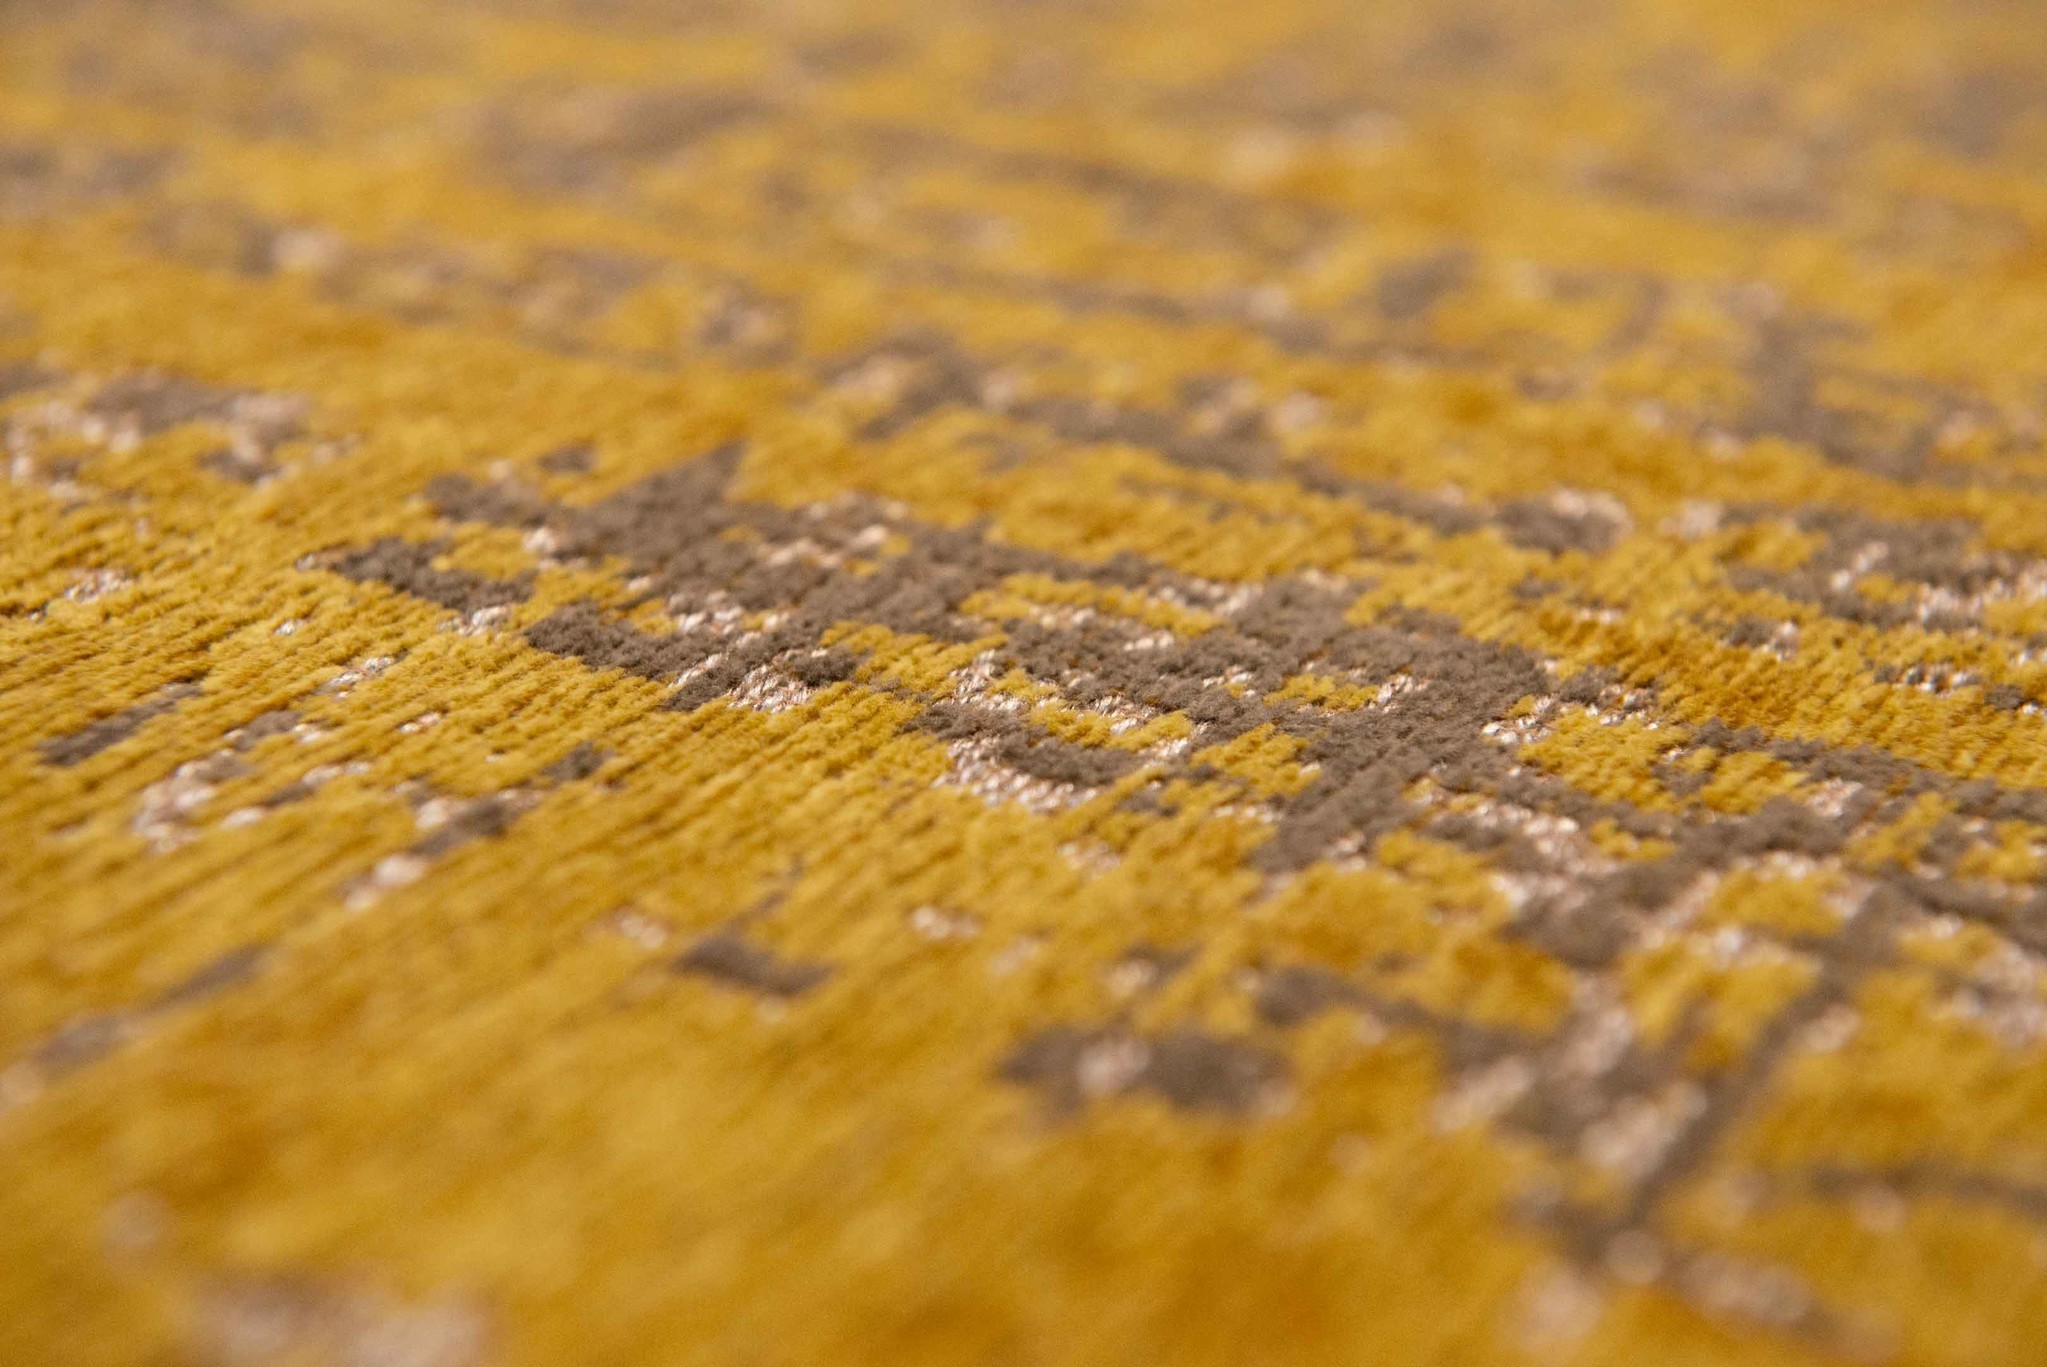 Abstract Gold Belgian Rug ☞ Size: 8' x 11' 2" (240 x 340 cm)